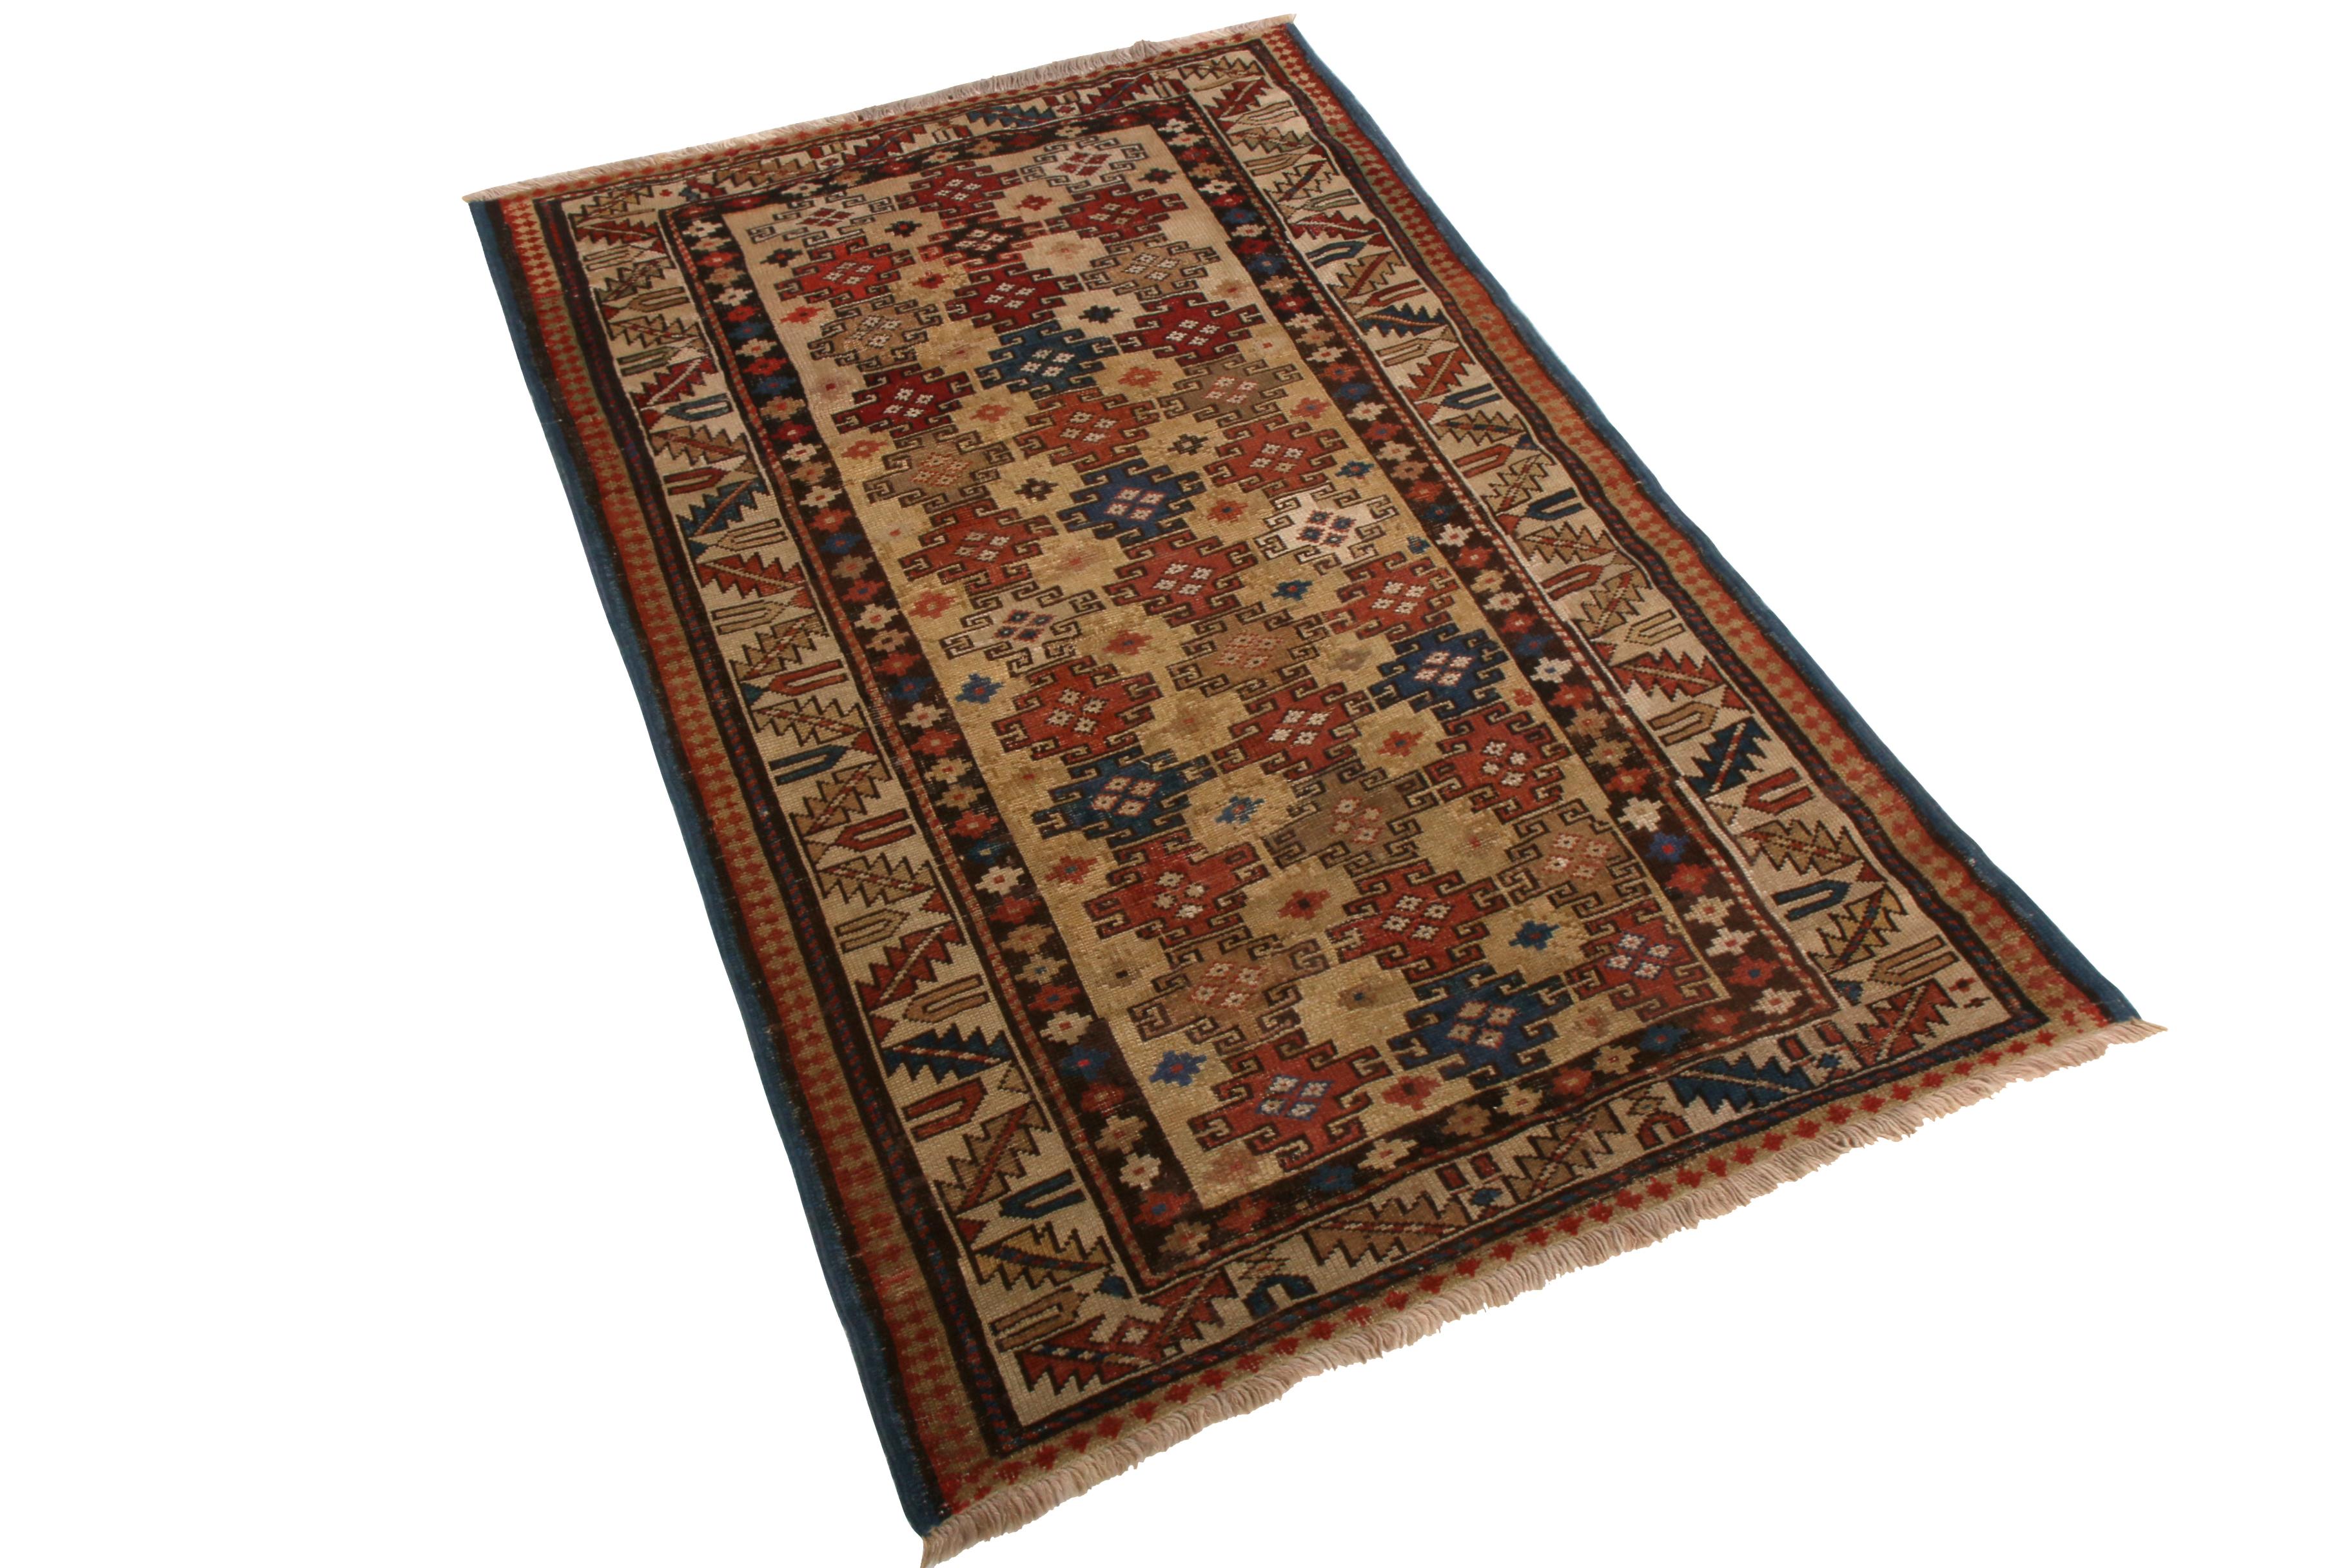 Hand knotted in wool originating from Russia between 1910-1920, this antique Kuba rug joins a selection of hand-picked favorites in Rug & Kilims antique and vintage rug collections selected for distinction and rarity. While the pallet of dancing red